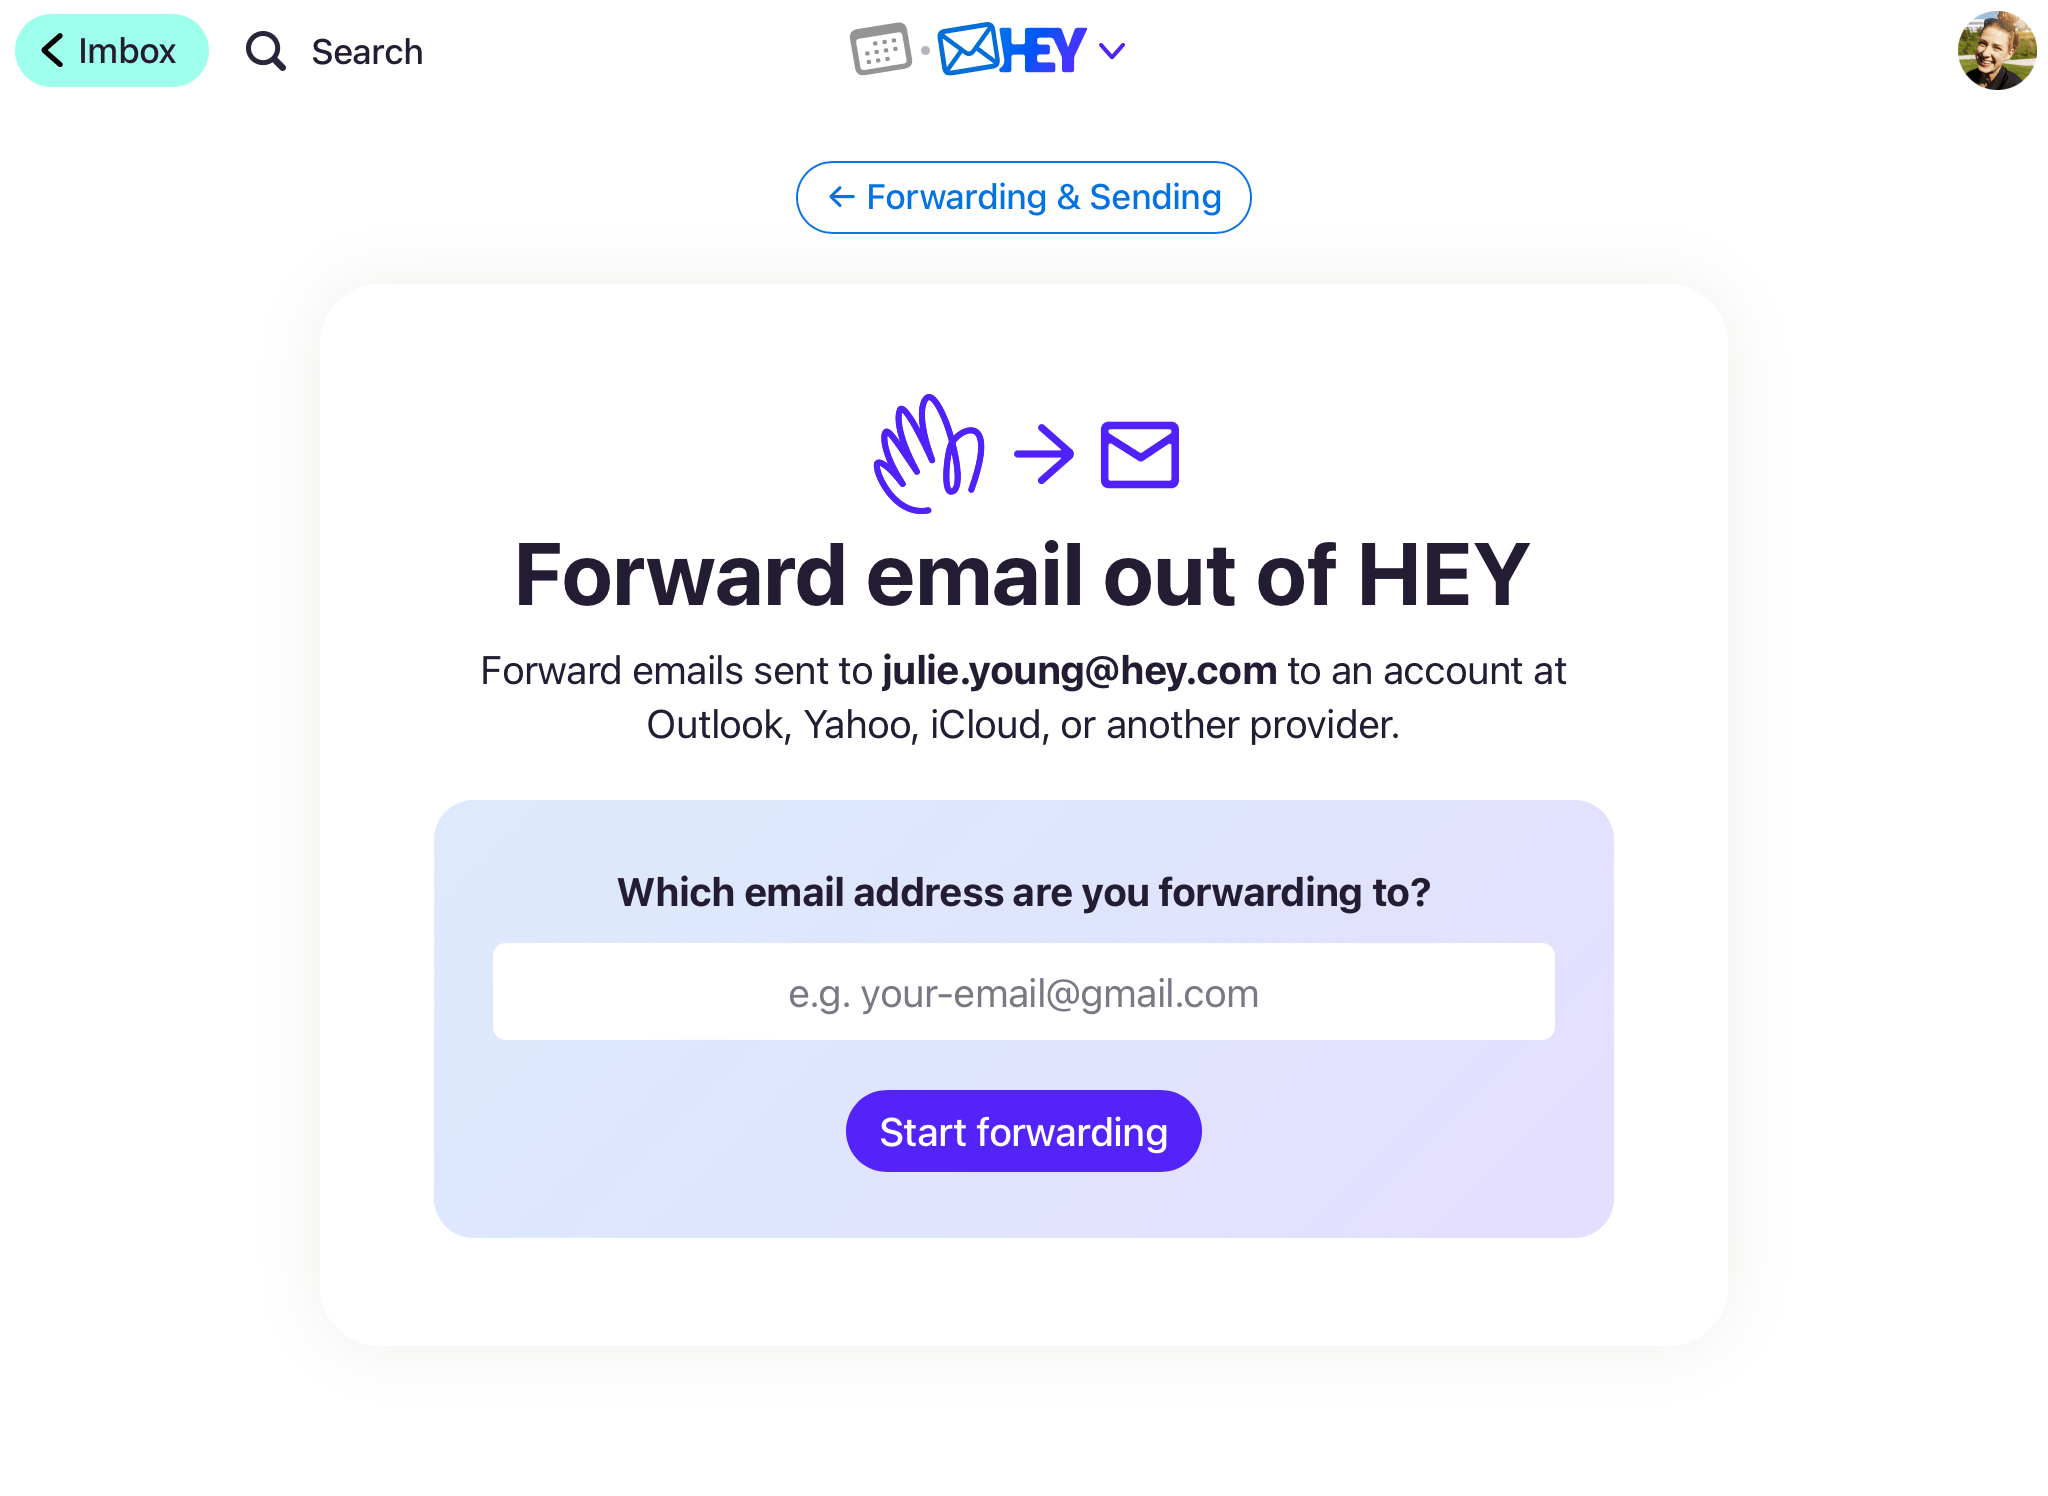 The HEY interface for setting up a forwarding